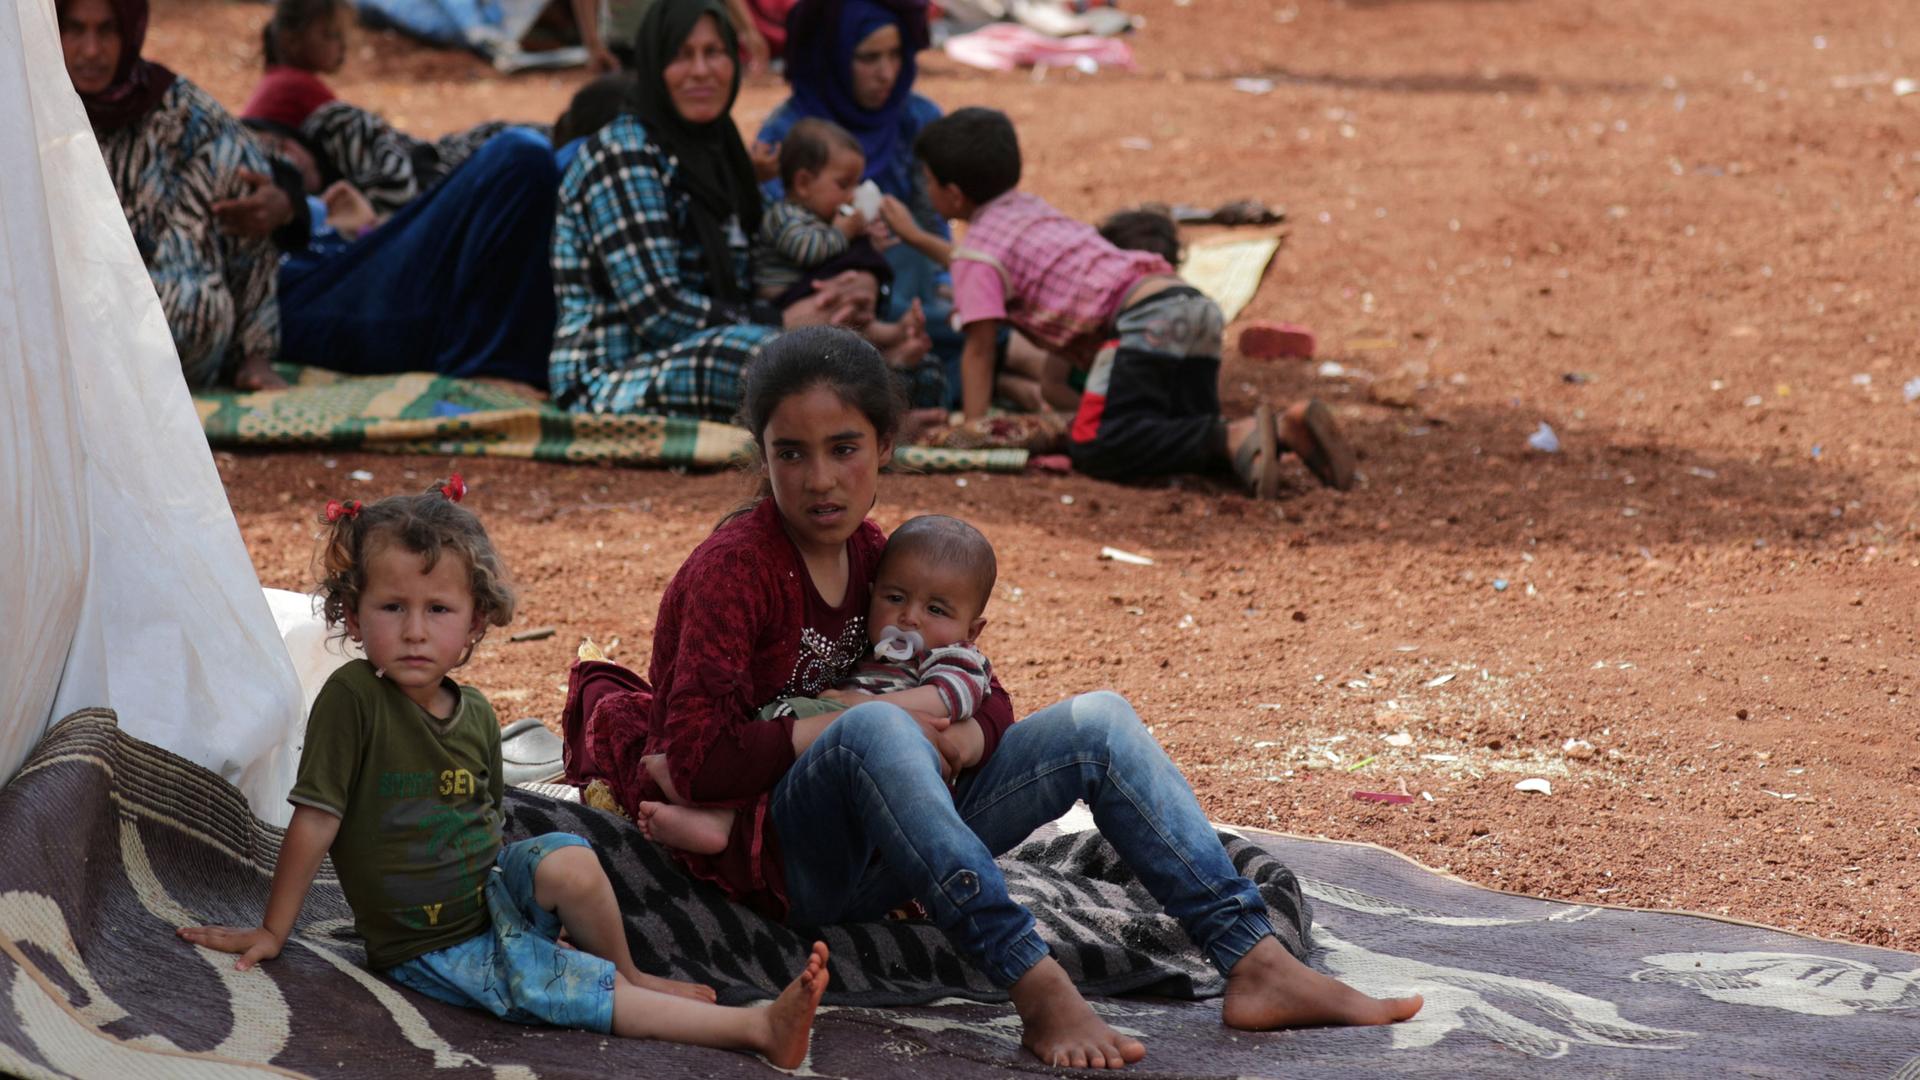 Two displaced Syrian girls is shown sitting on a mat and one holding a baby.